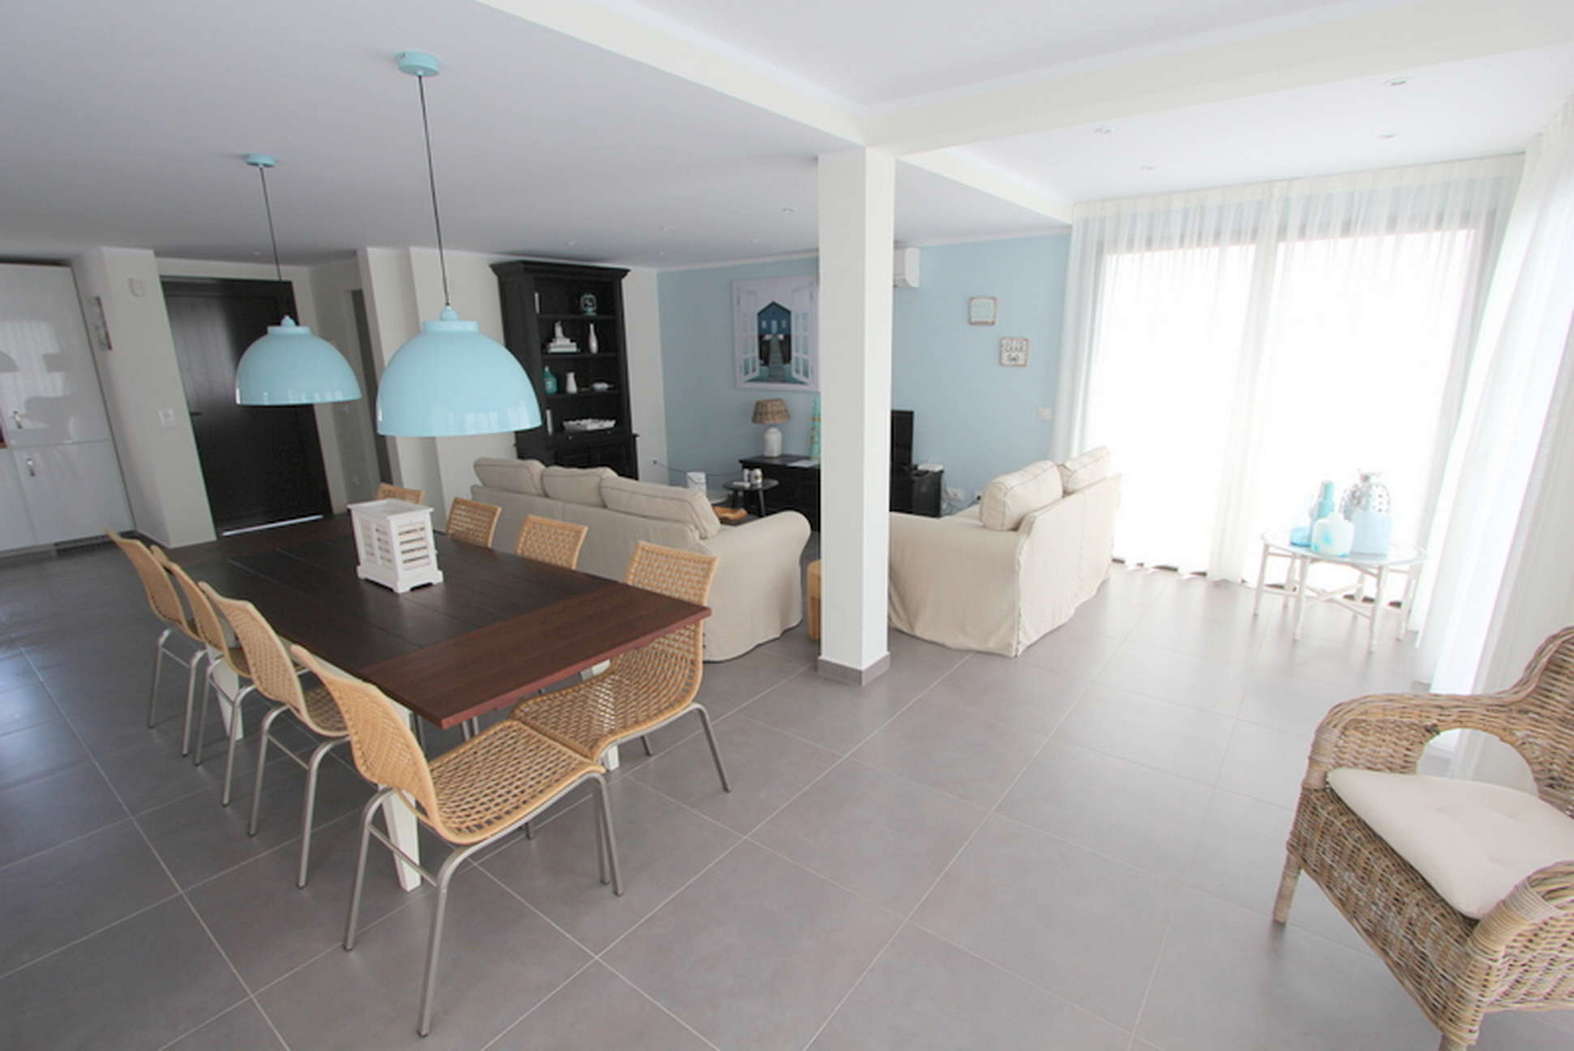 SPLENDID HOUSE ON THE CANAL RENOVATED FOR SALE IN EMPURIABRAVA